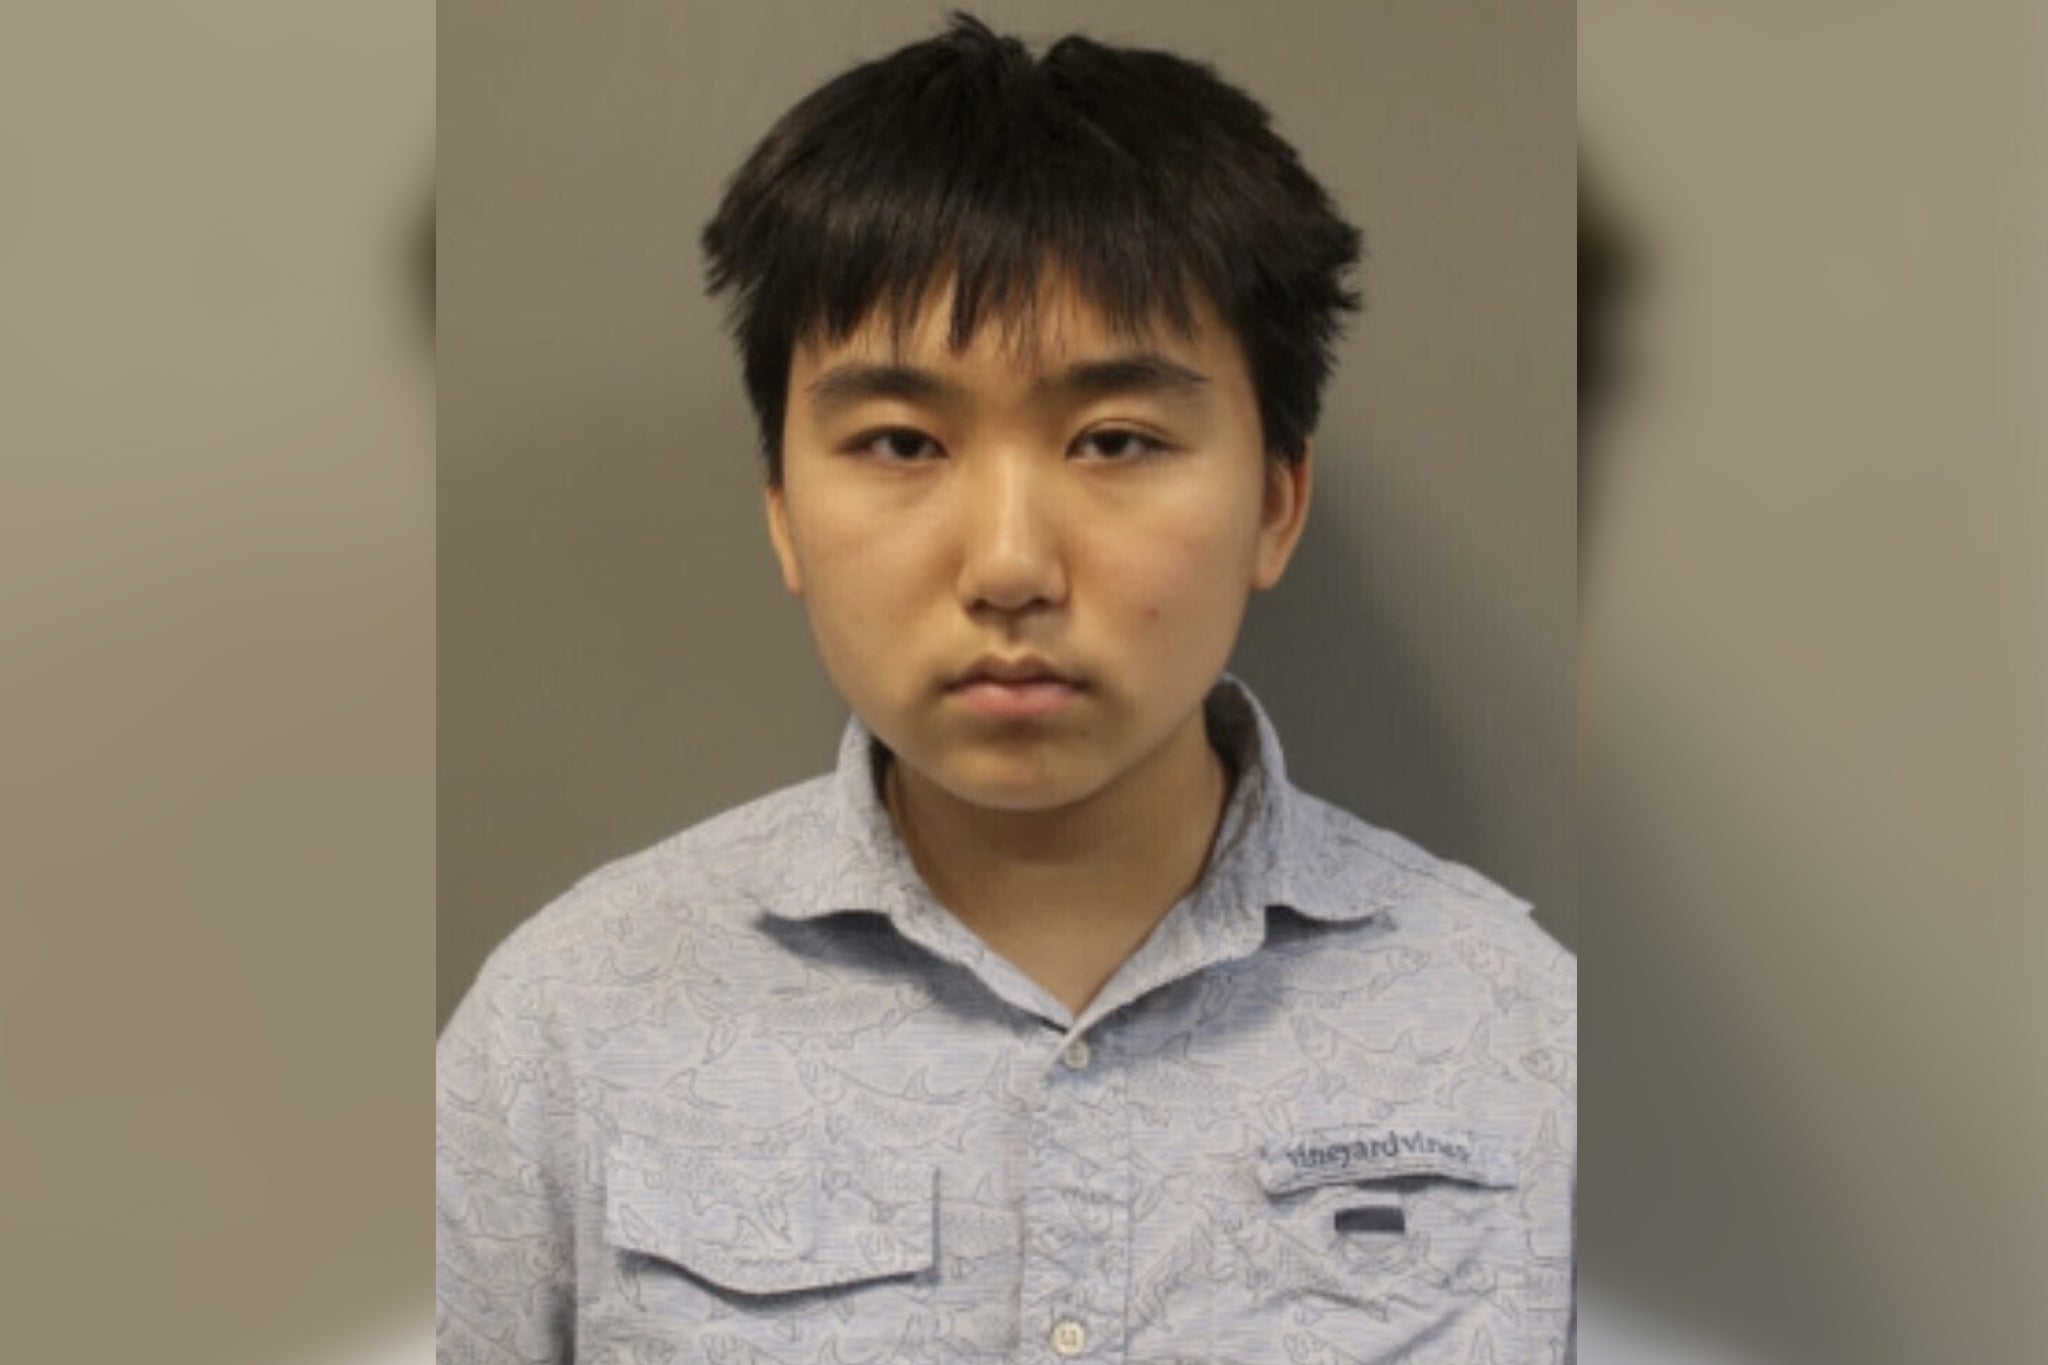 Alex Ye, a high school student, has been charged after police discovered his plans to commit a school shooting.